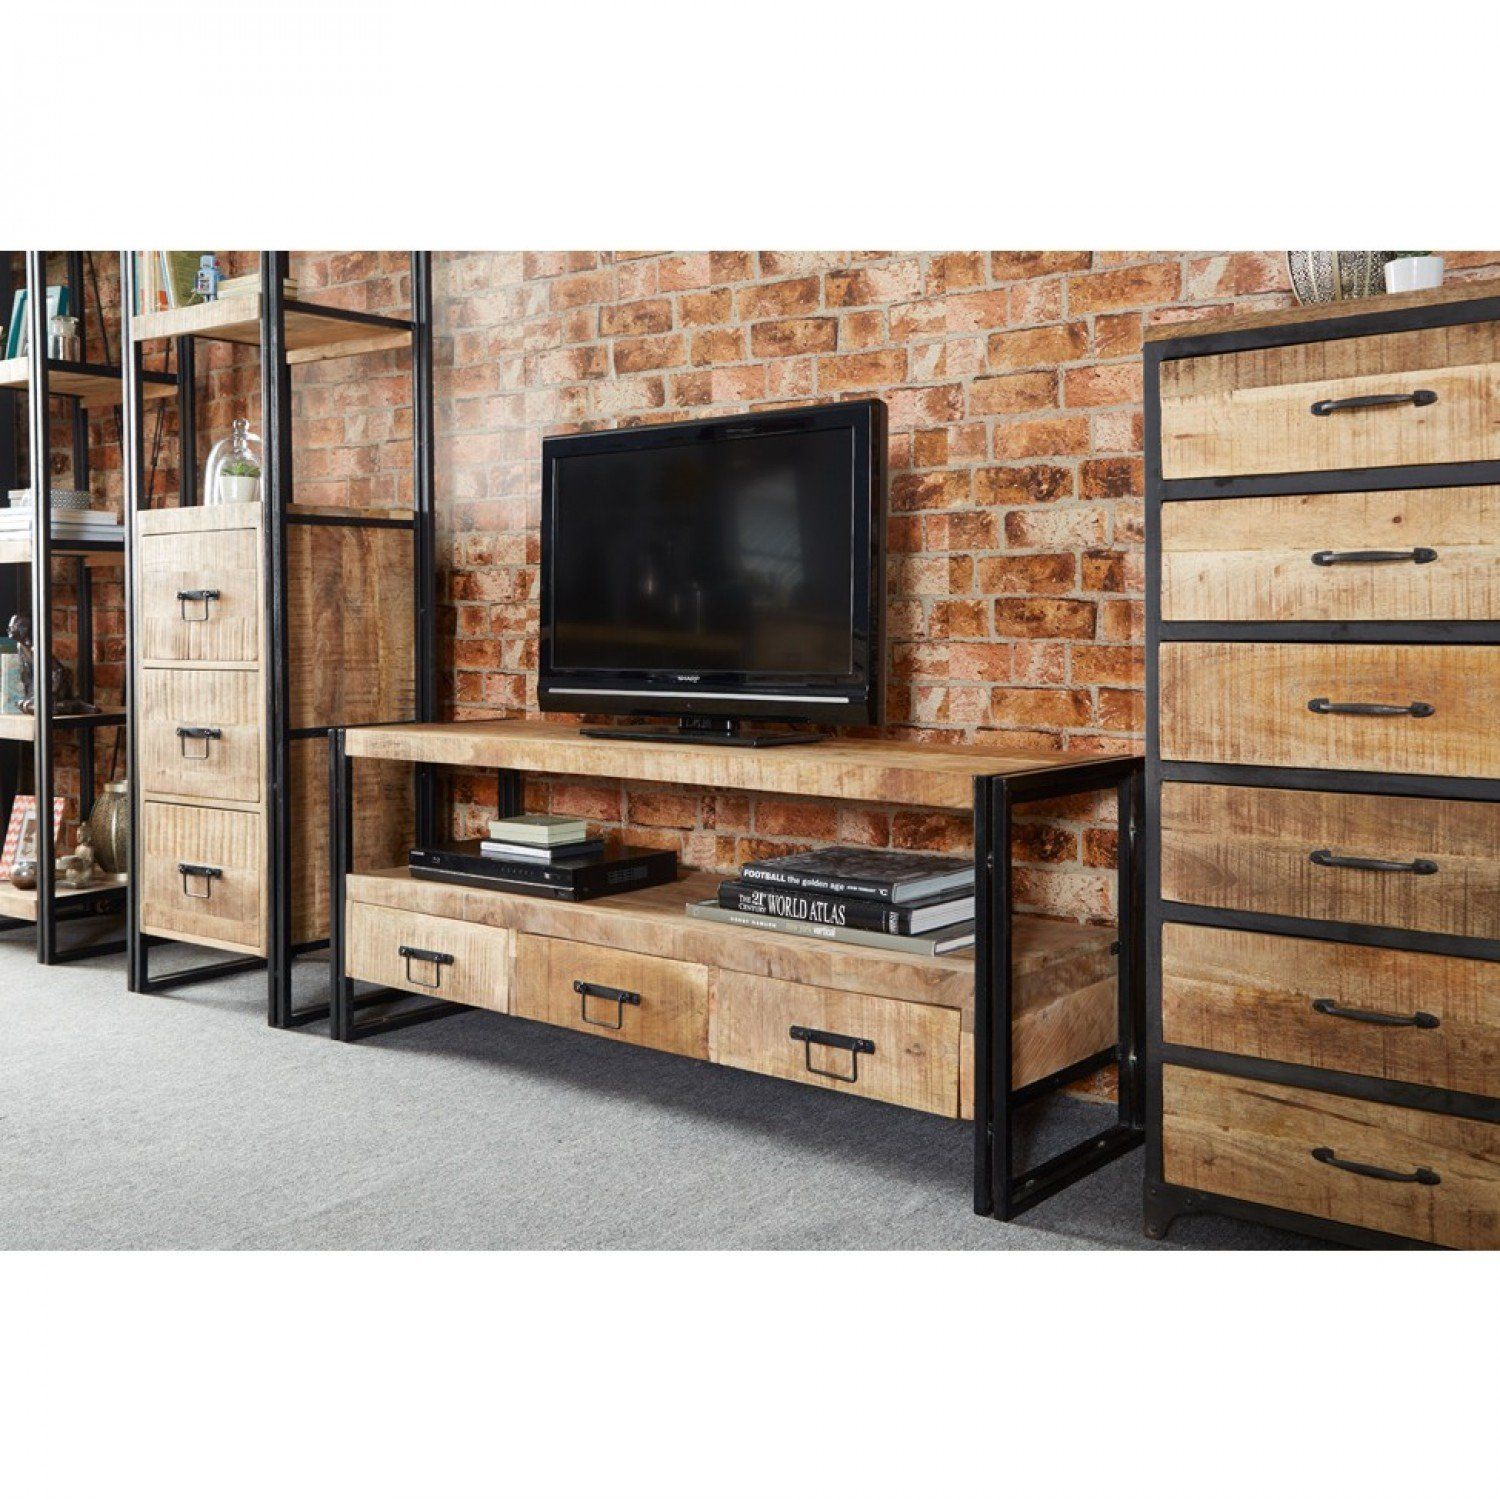 Cosmo Industrial Large Plasma Tv Stand | Oak Furniture House Throughout Plasma Tv Holders (View 4 of 15)